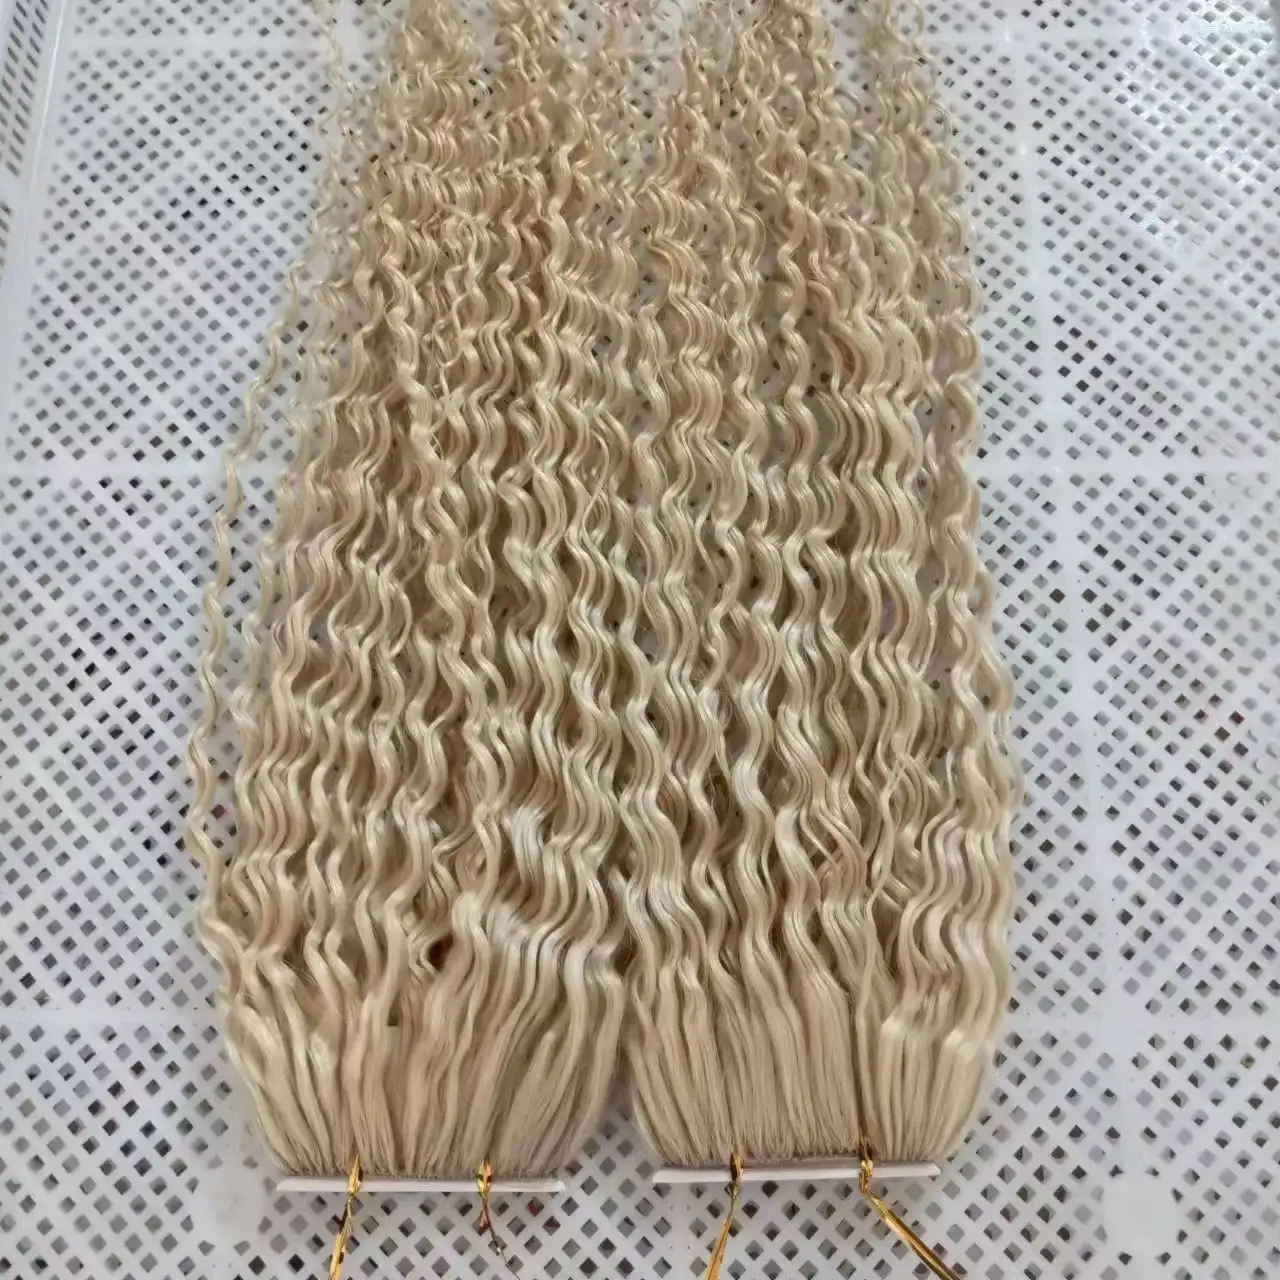 100% Virgin Remy Human Hair 0.6g/0.8g/1g/strand Blonde Color 22inch Long Feather Hair Extensions U/I/V/Nano Tip Hair Extension